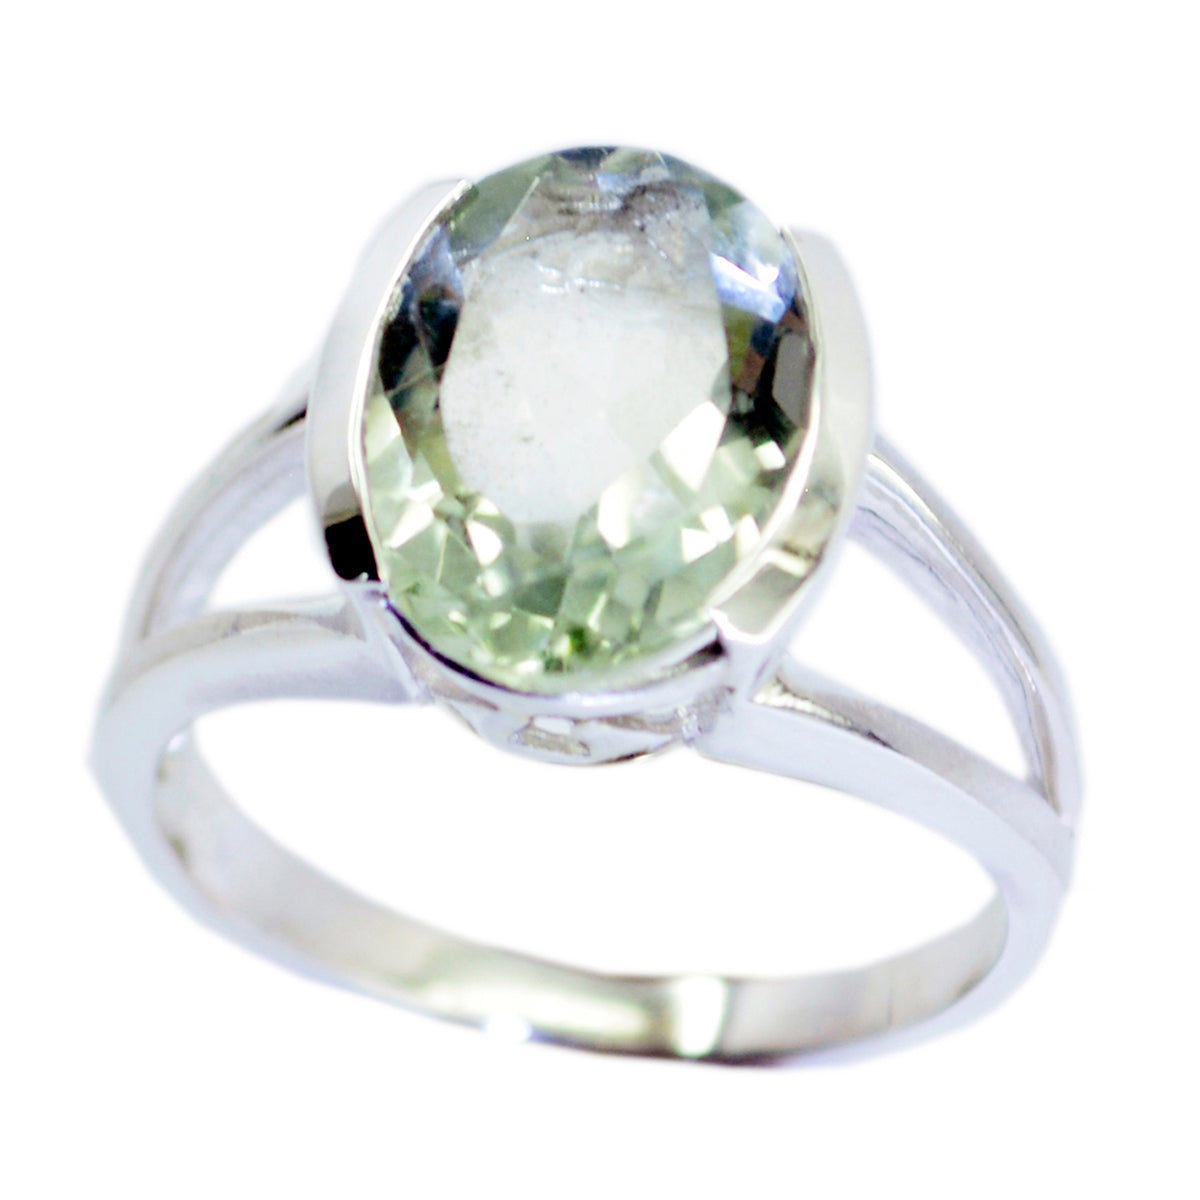 Excellent Gem Green Amethyst Sterling Silver Ring Grandmother Jewelry